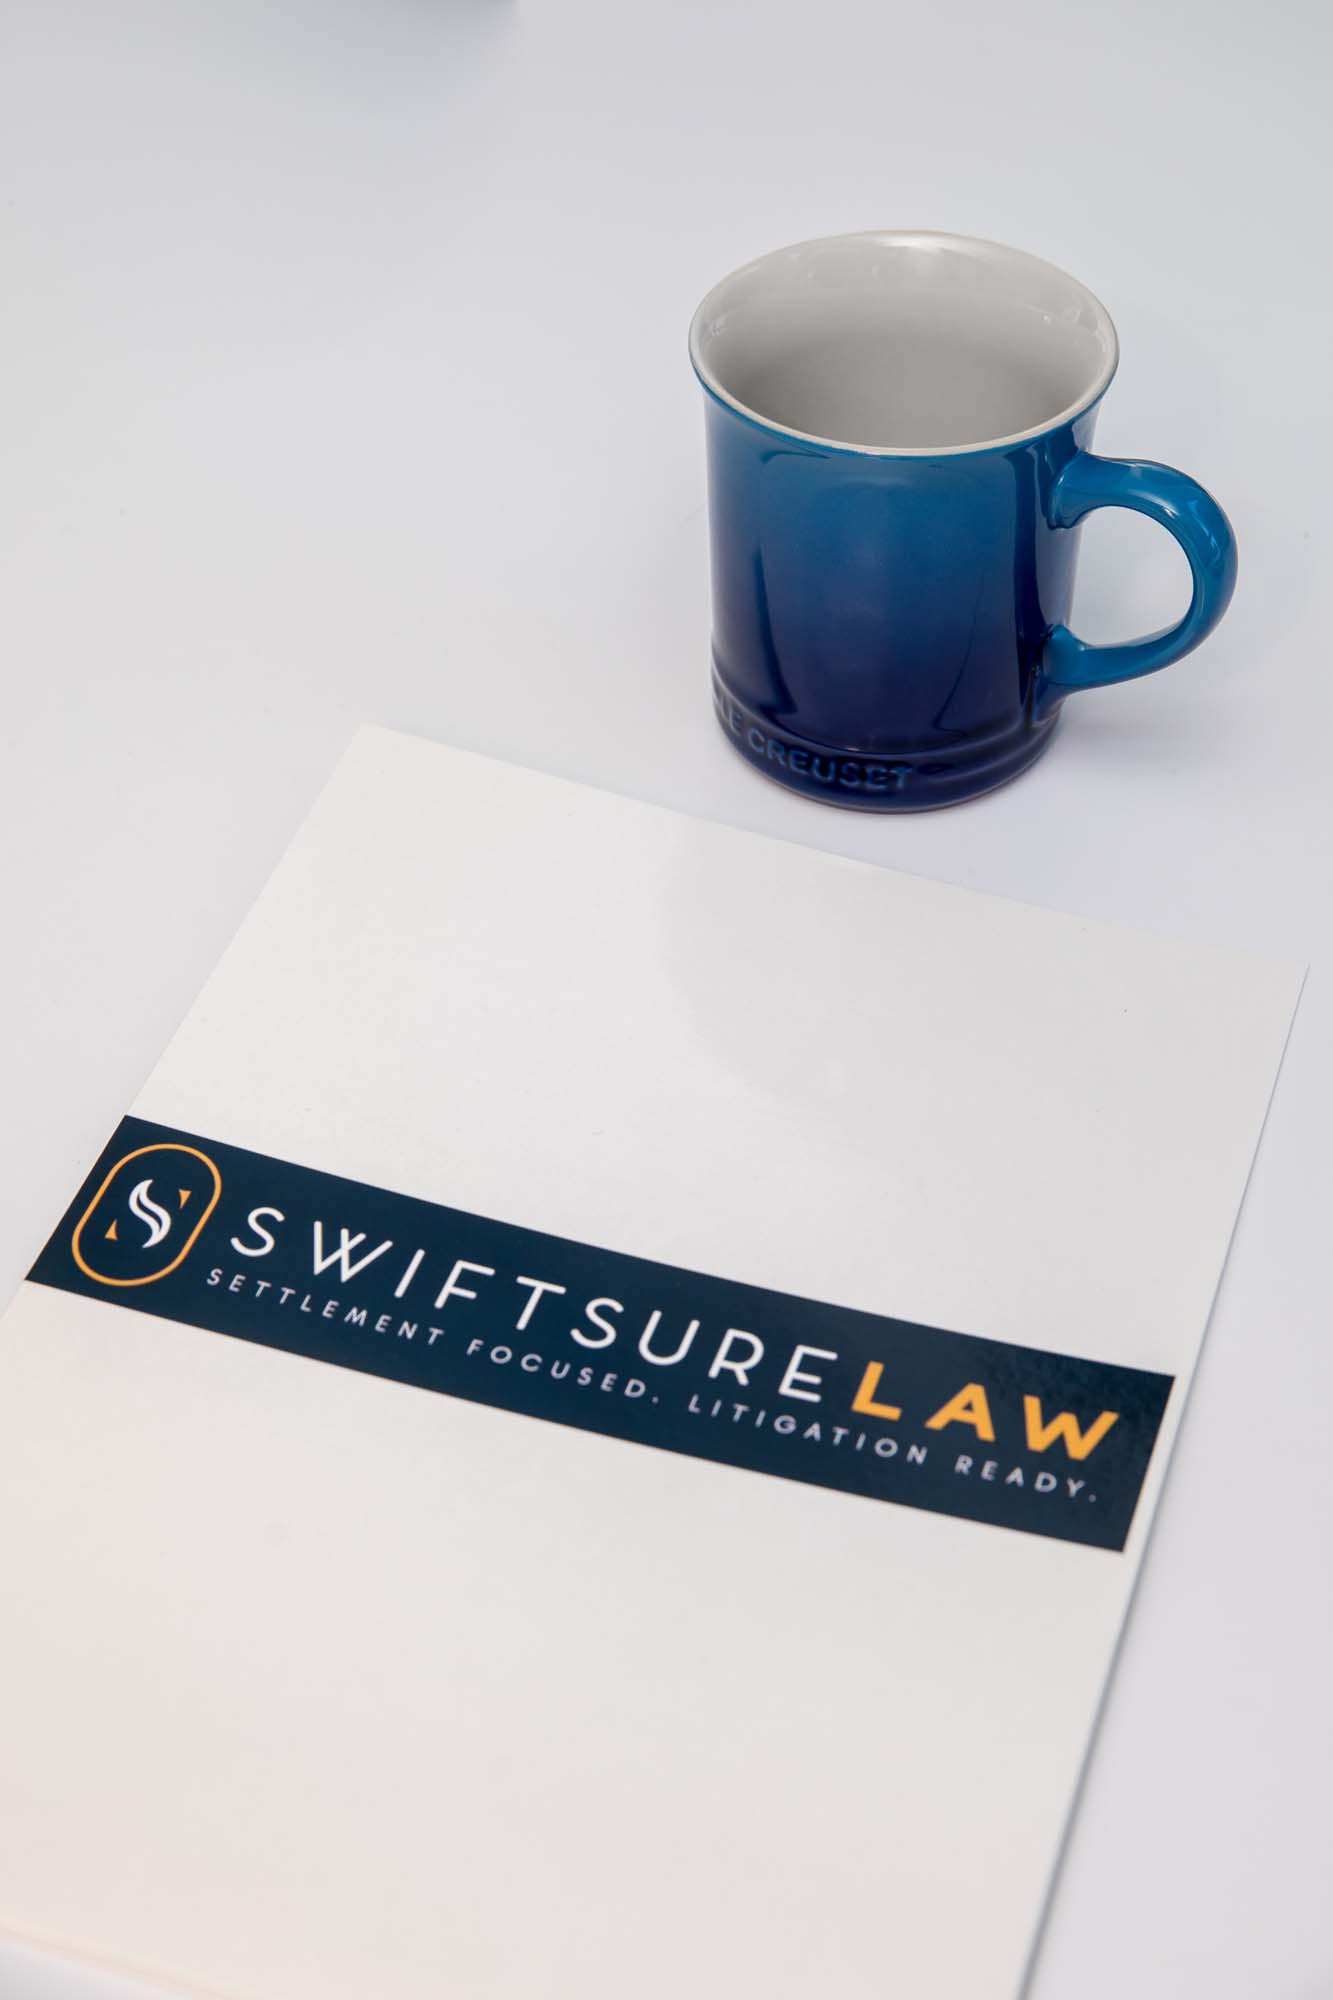 Picture of a document that has swiftsure law logo and blue cup on top